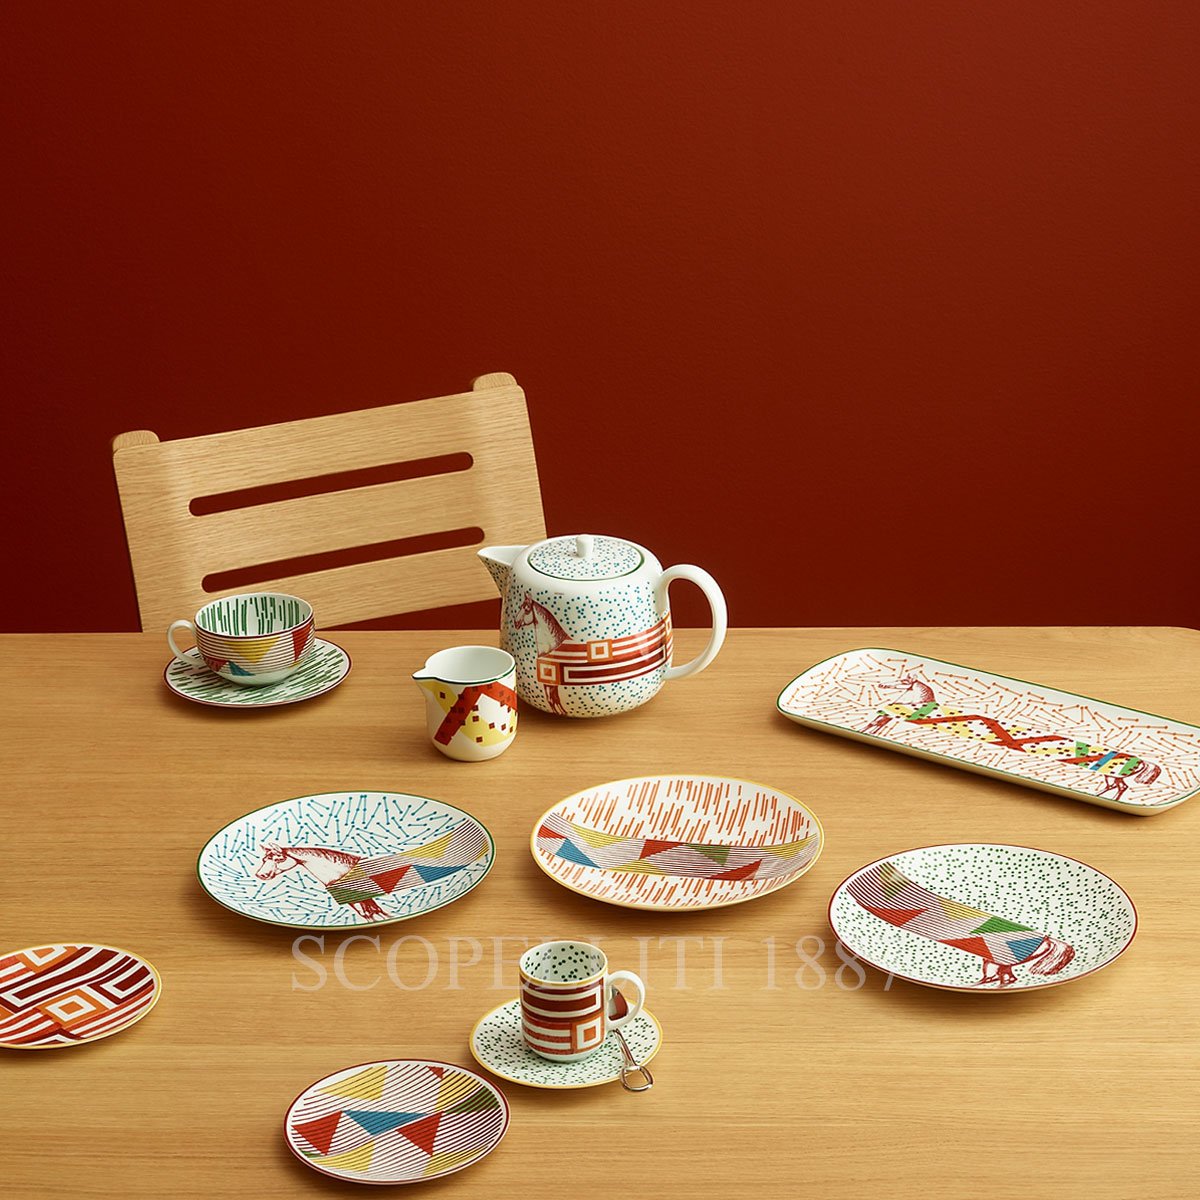 Obsession Discovery that's all hermes tableware set emulsion Slip ...